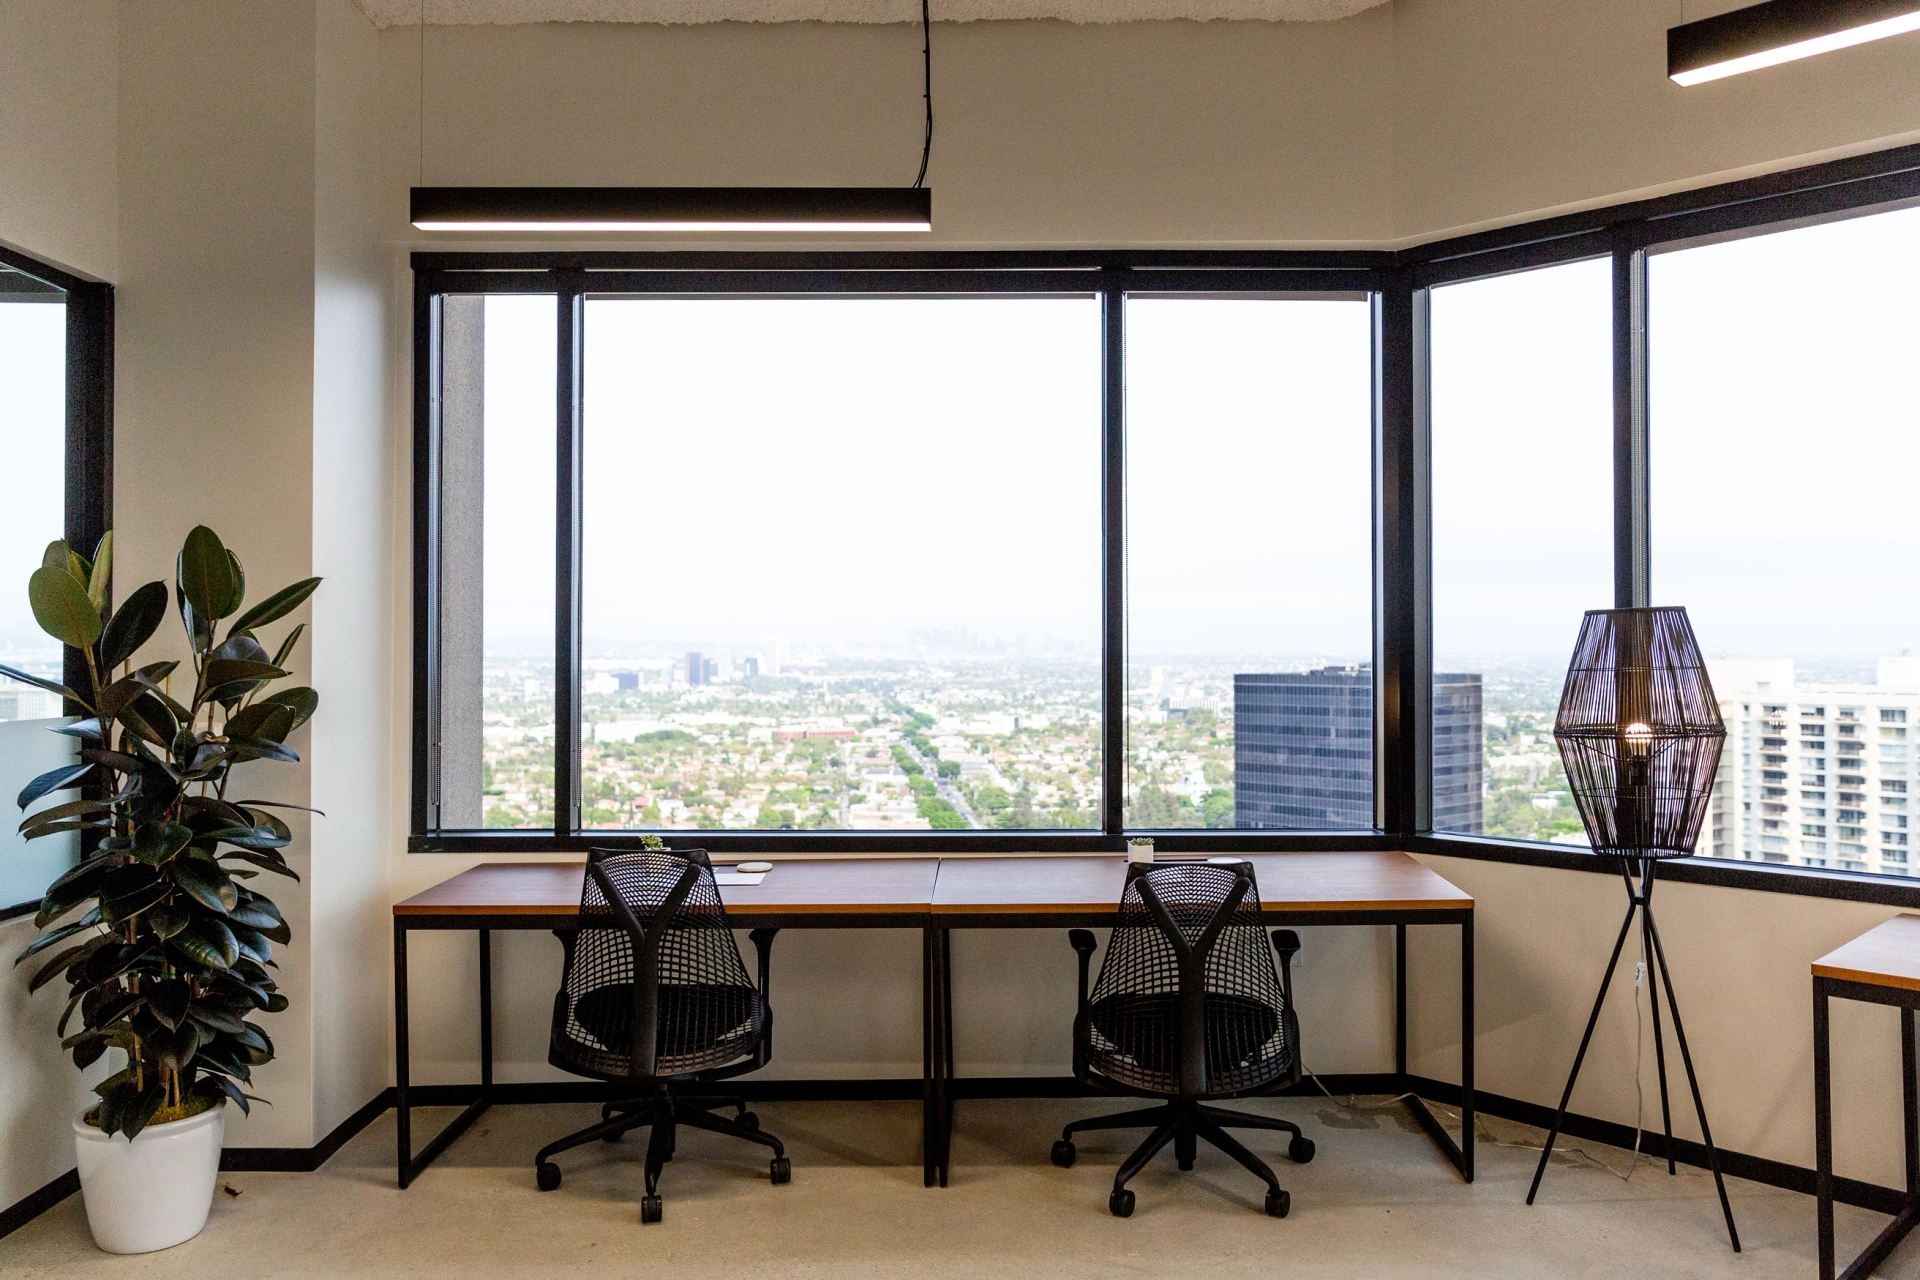 A Los Angeles workspace featuring large windows overlooking the city.